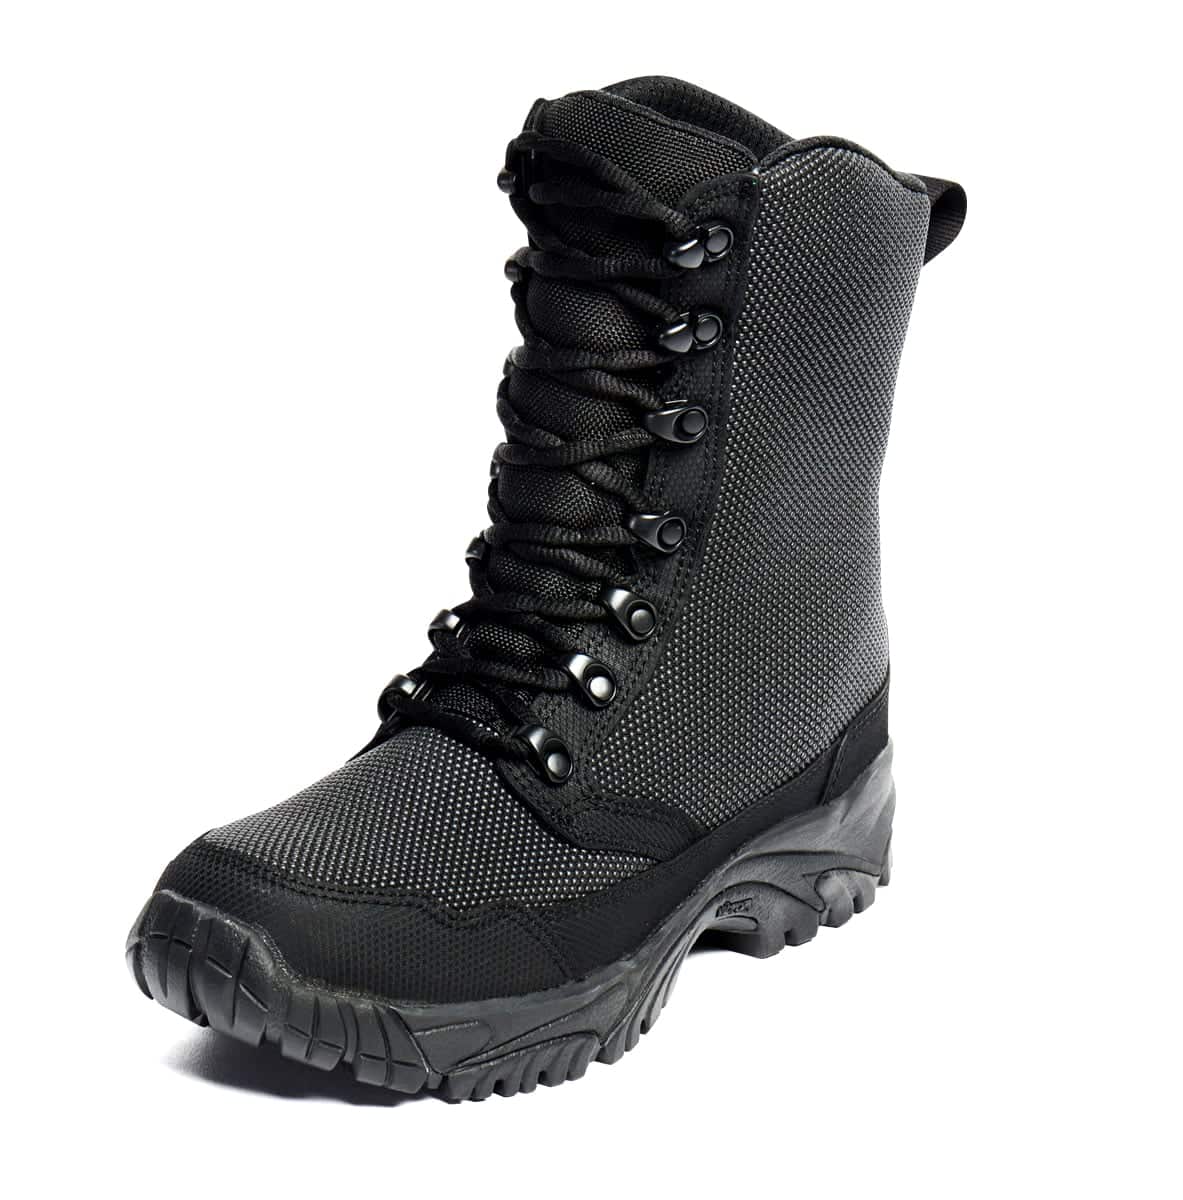 Buy WIDEWAY Men's 8'' Military Tactical Boots Outdoor Water Resistant Boots  with Zipper Black at Amazon.in